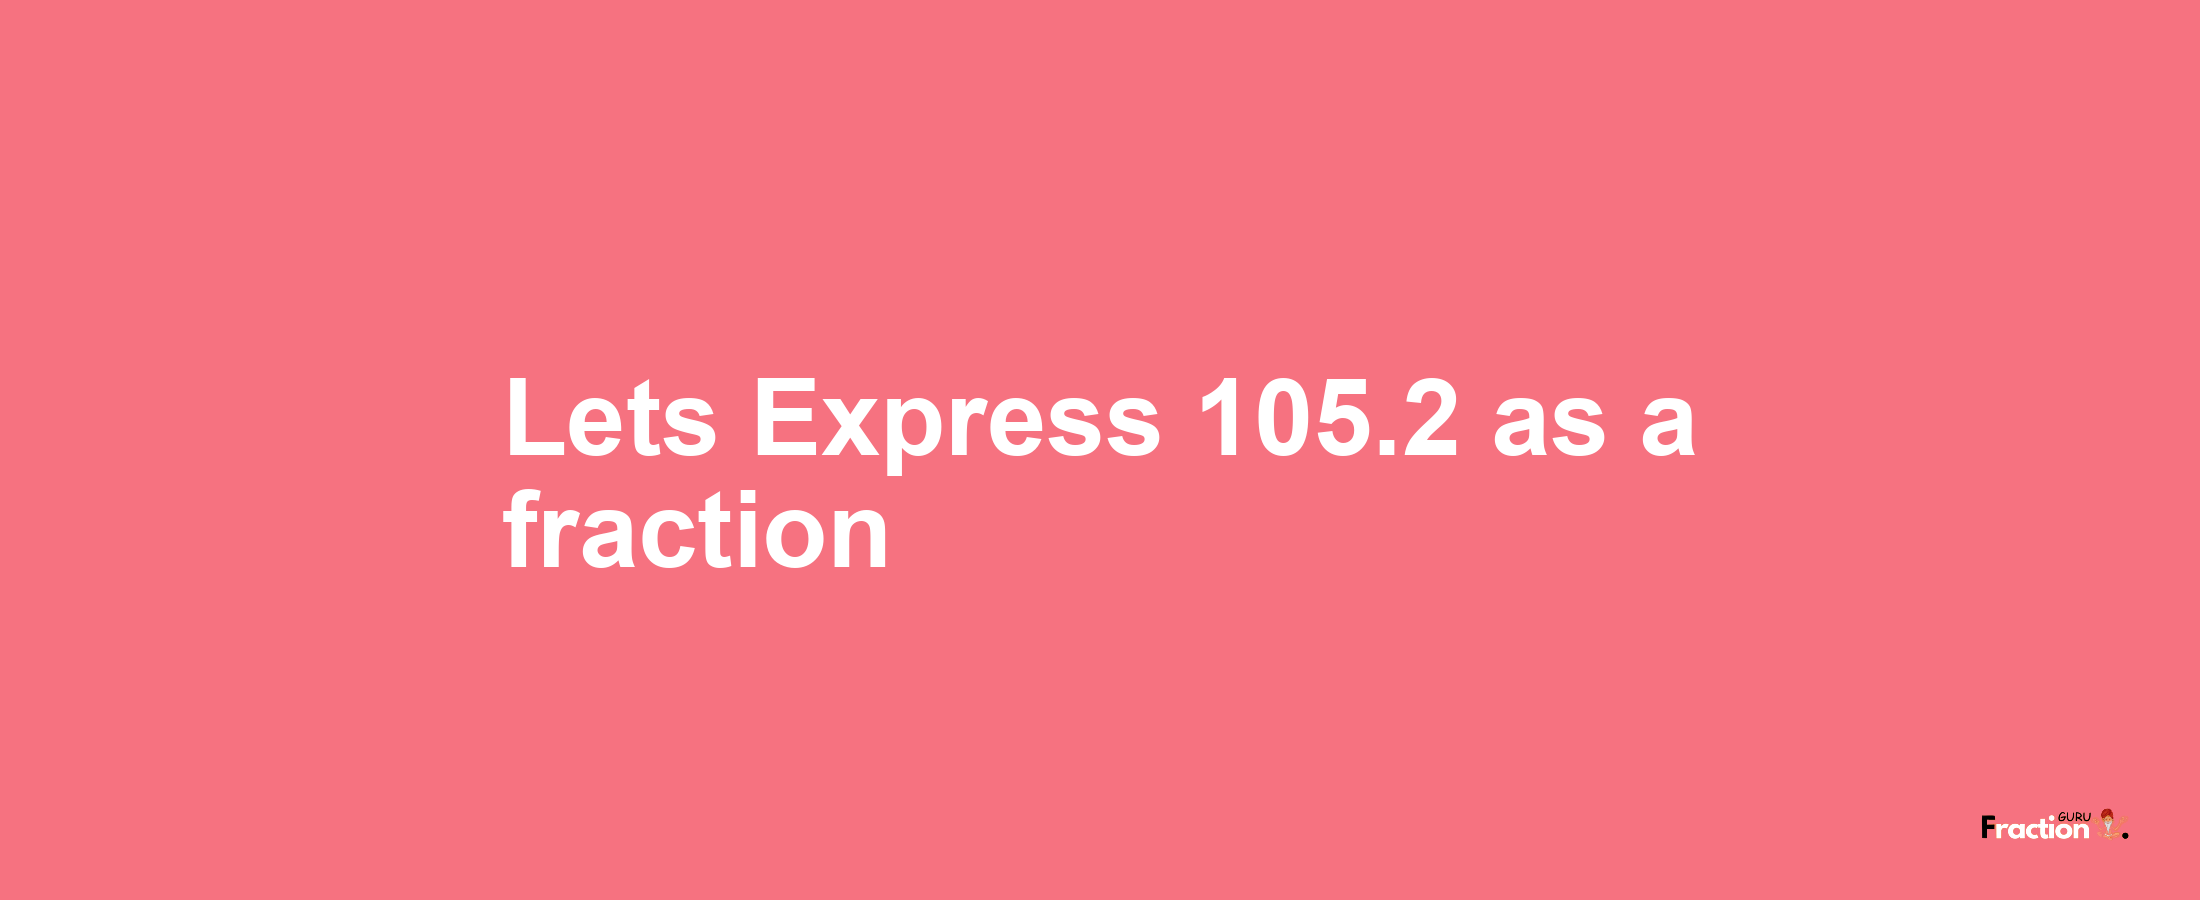 Lets Express 105.2 as afraction